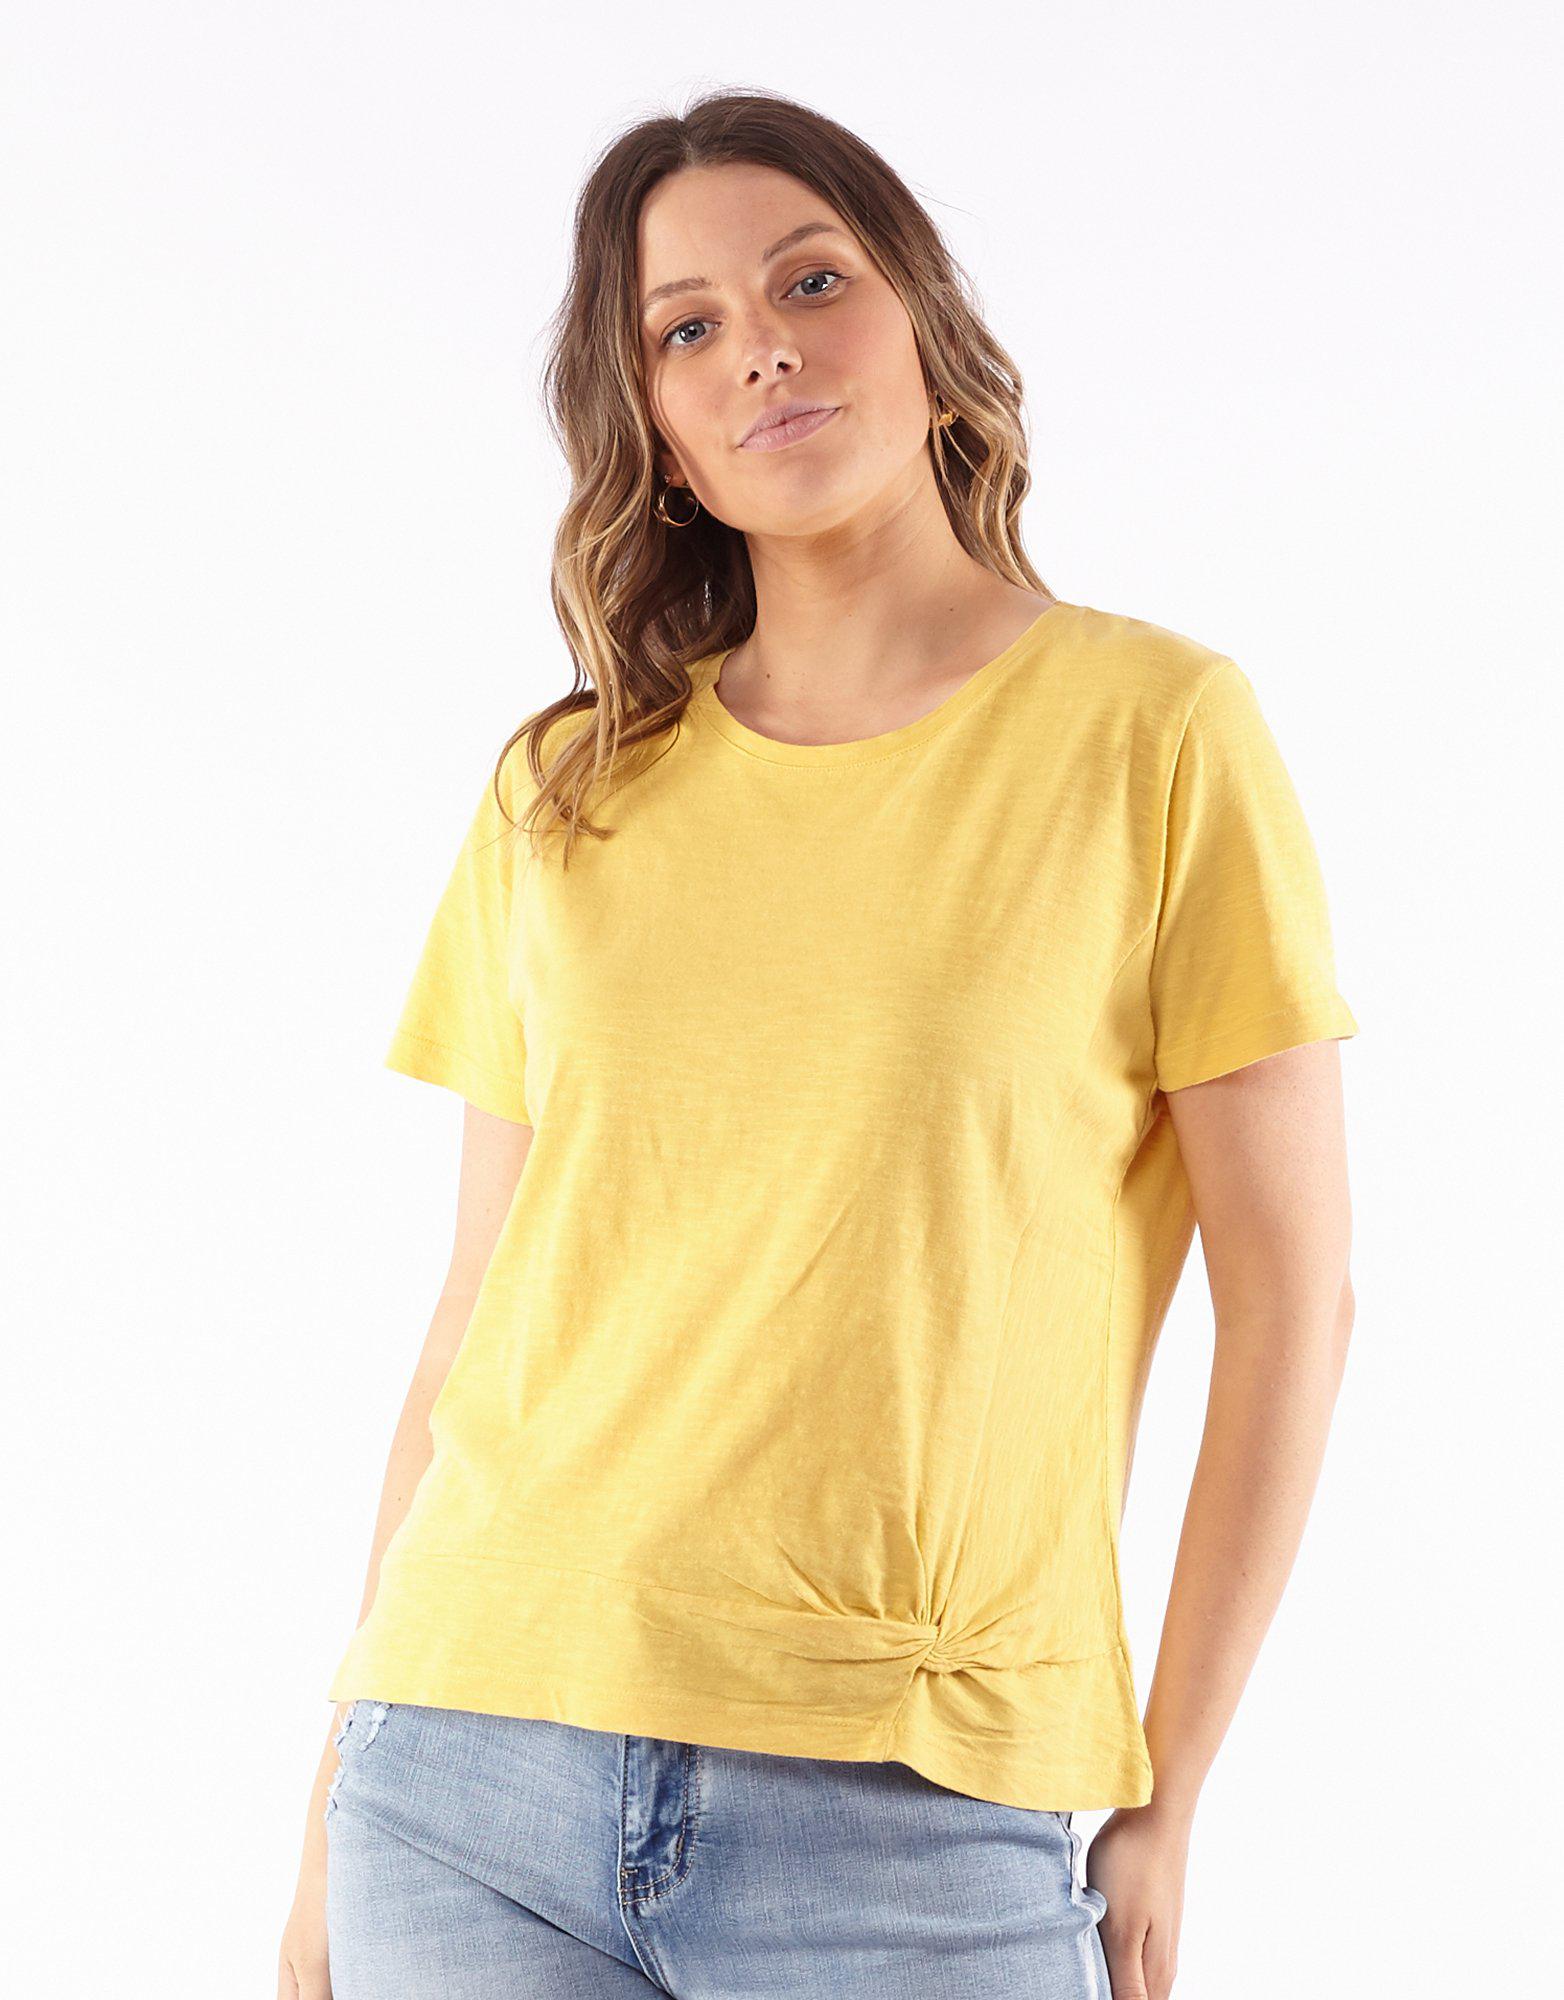 Knot Front Crop Tee - Mustard - Foxwood - FUDGE Gifts Home Lifestyle